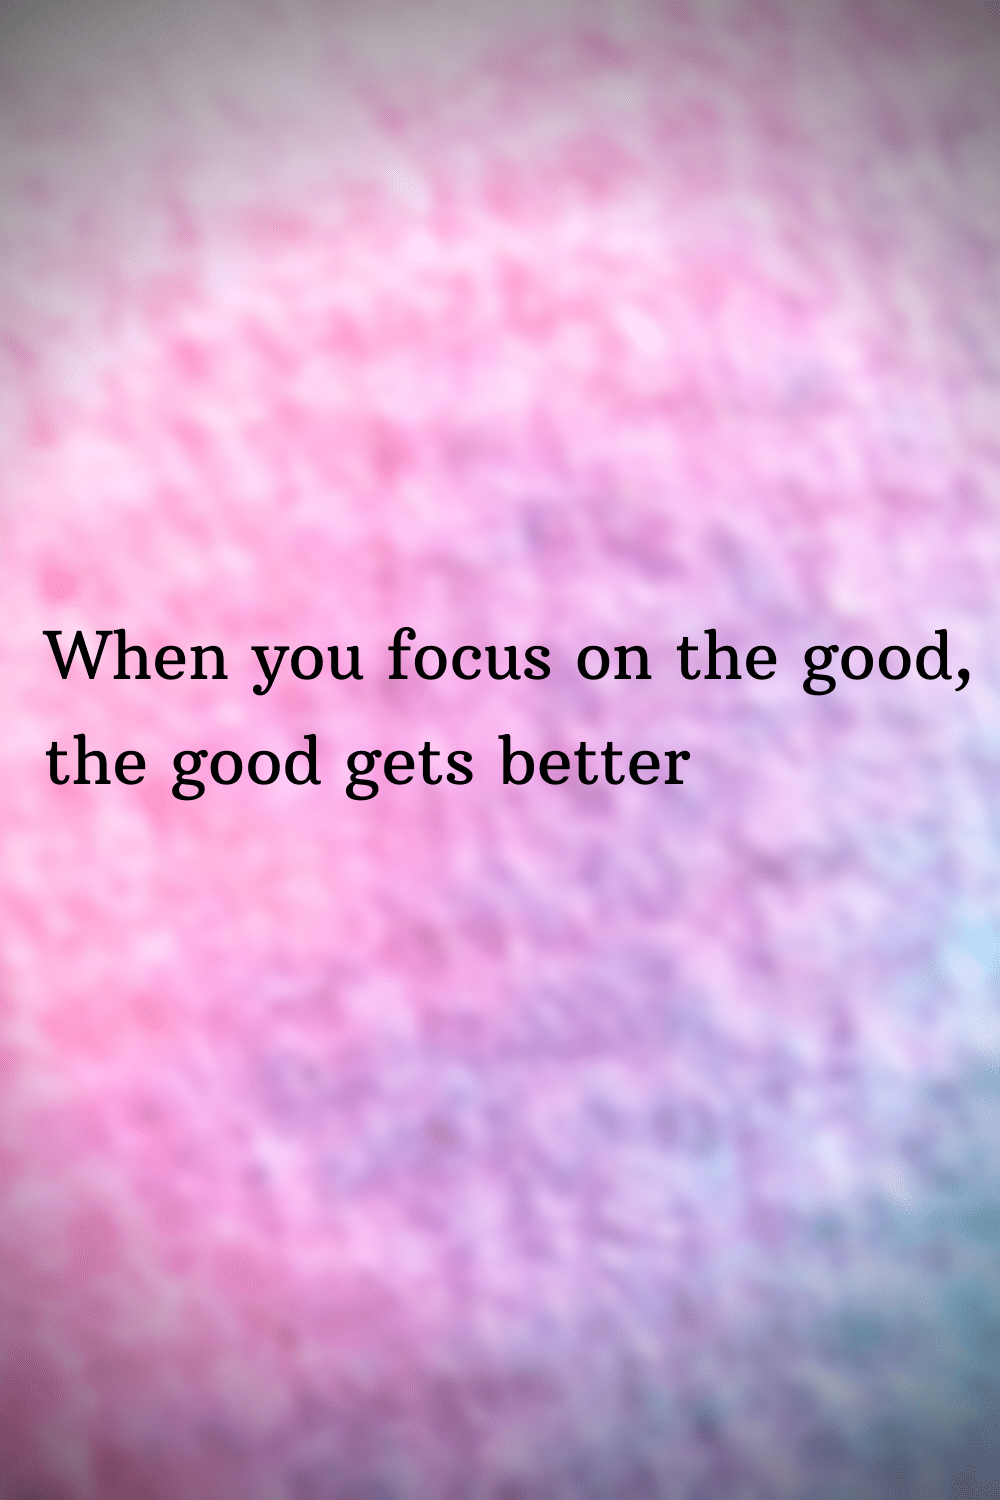 when you focus on the good, the good gets better